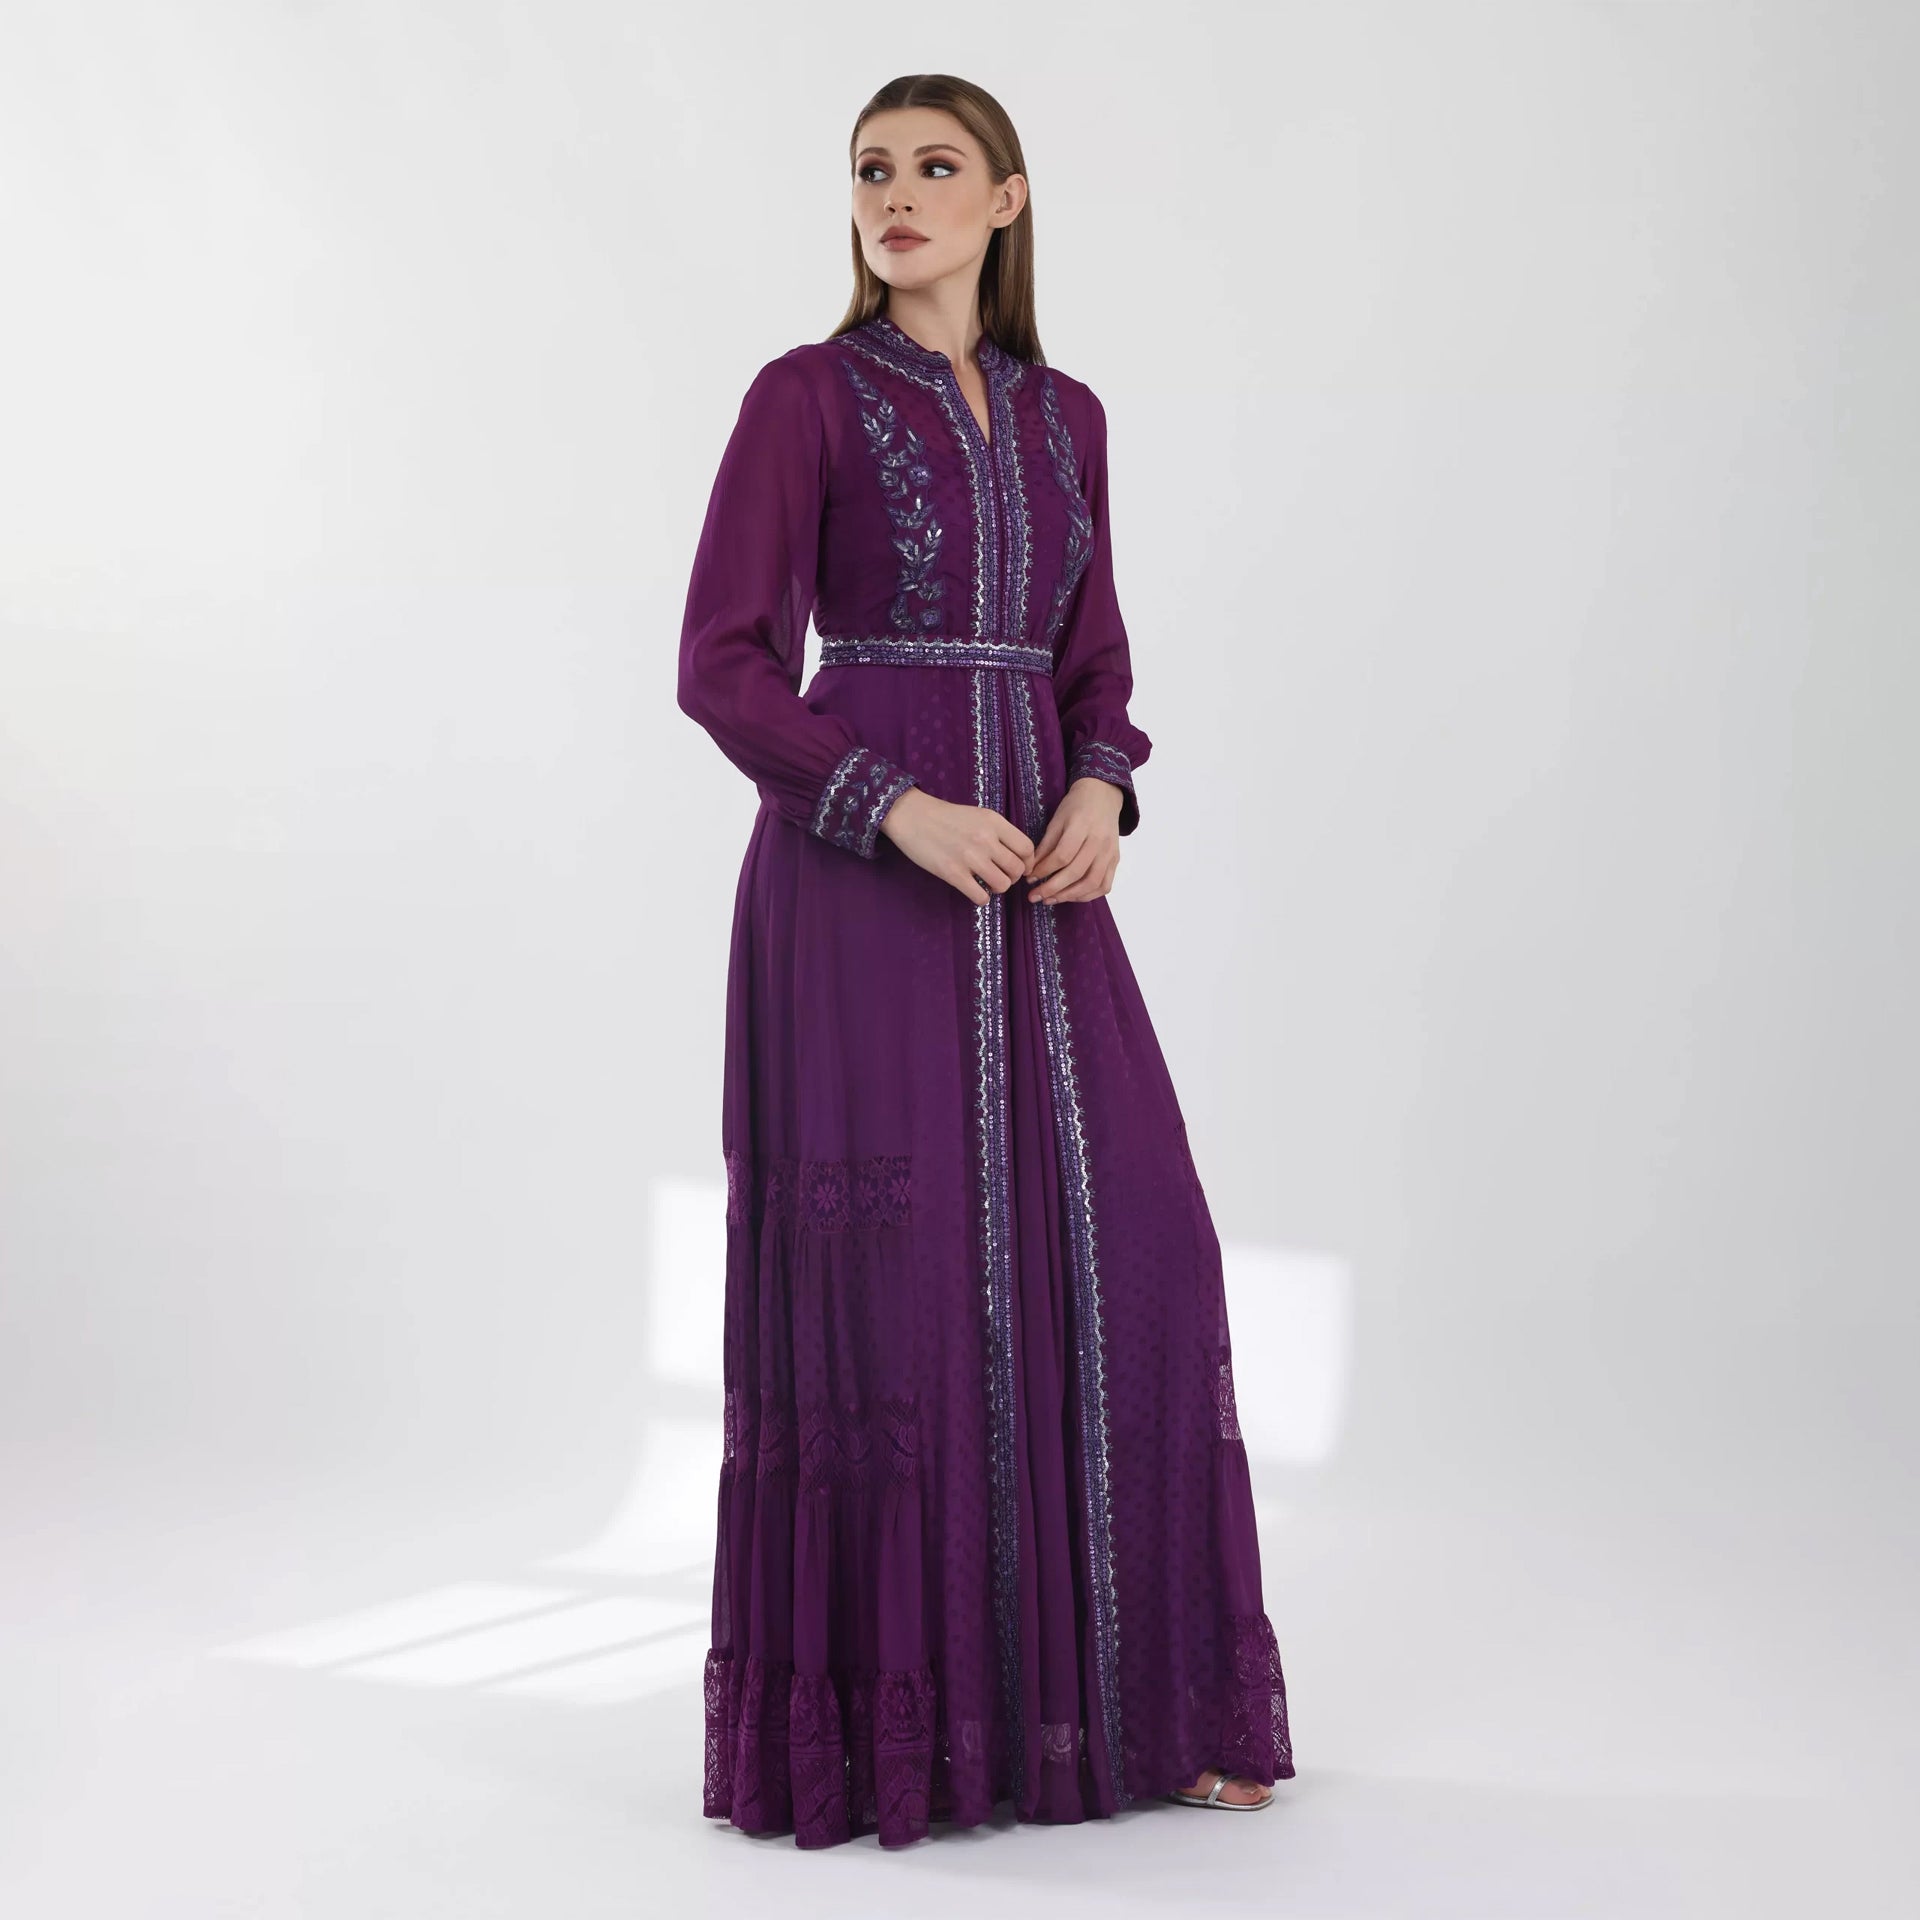 Purple Dress With Long Sleeves and Silver Embroidery From Shalky